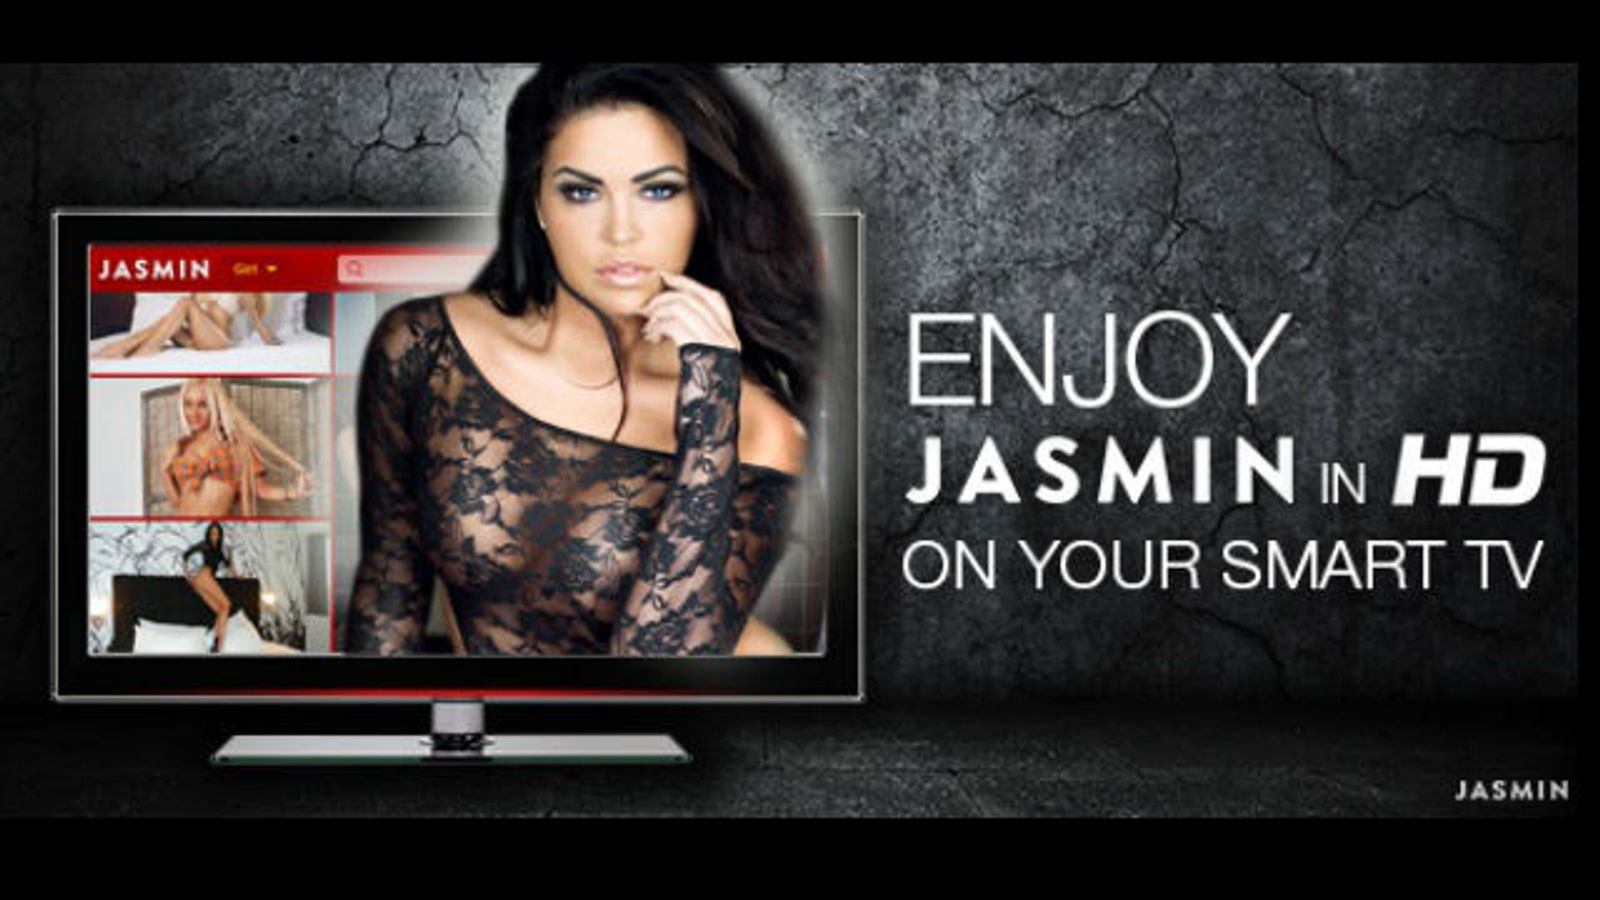 Jasmin.com Launches Live Chat Services for HDTV